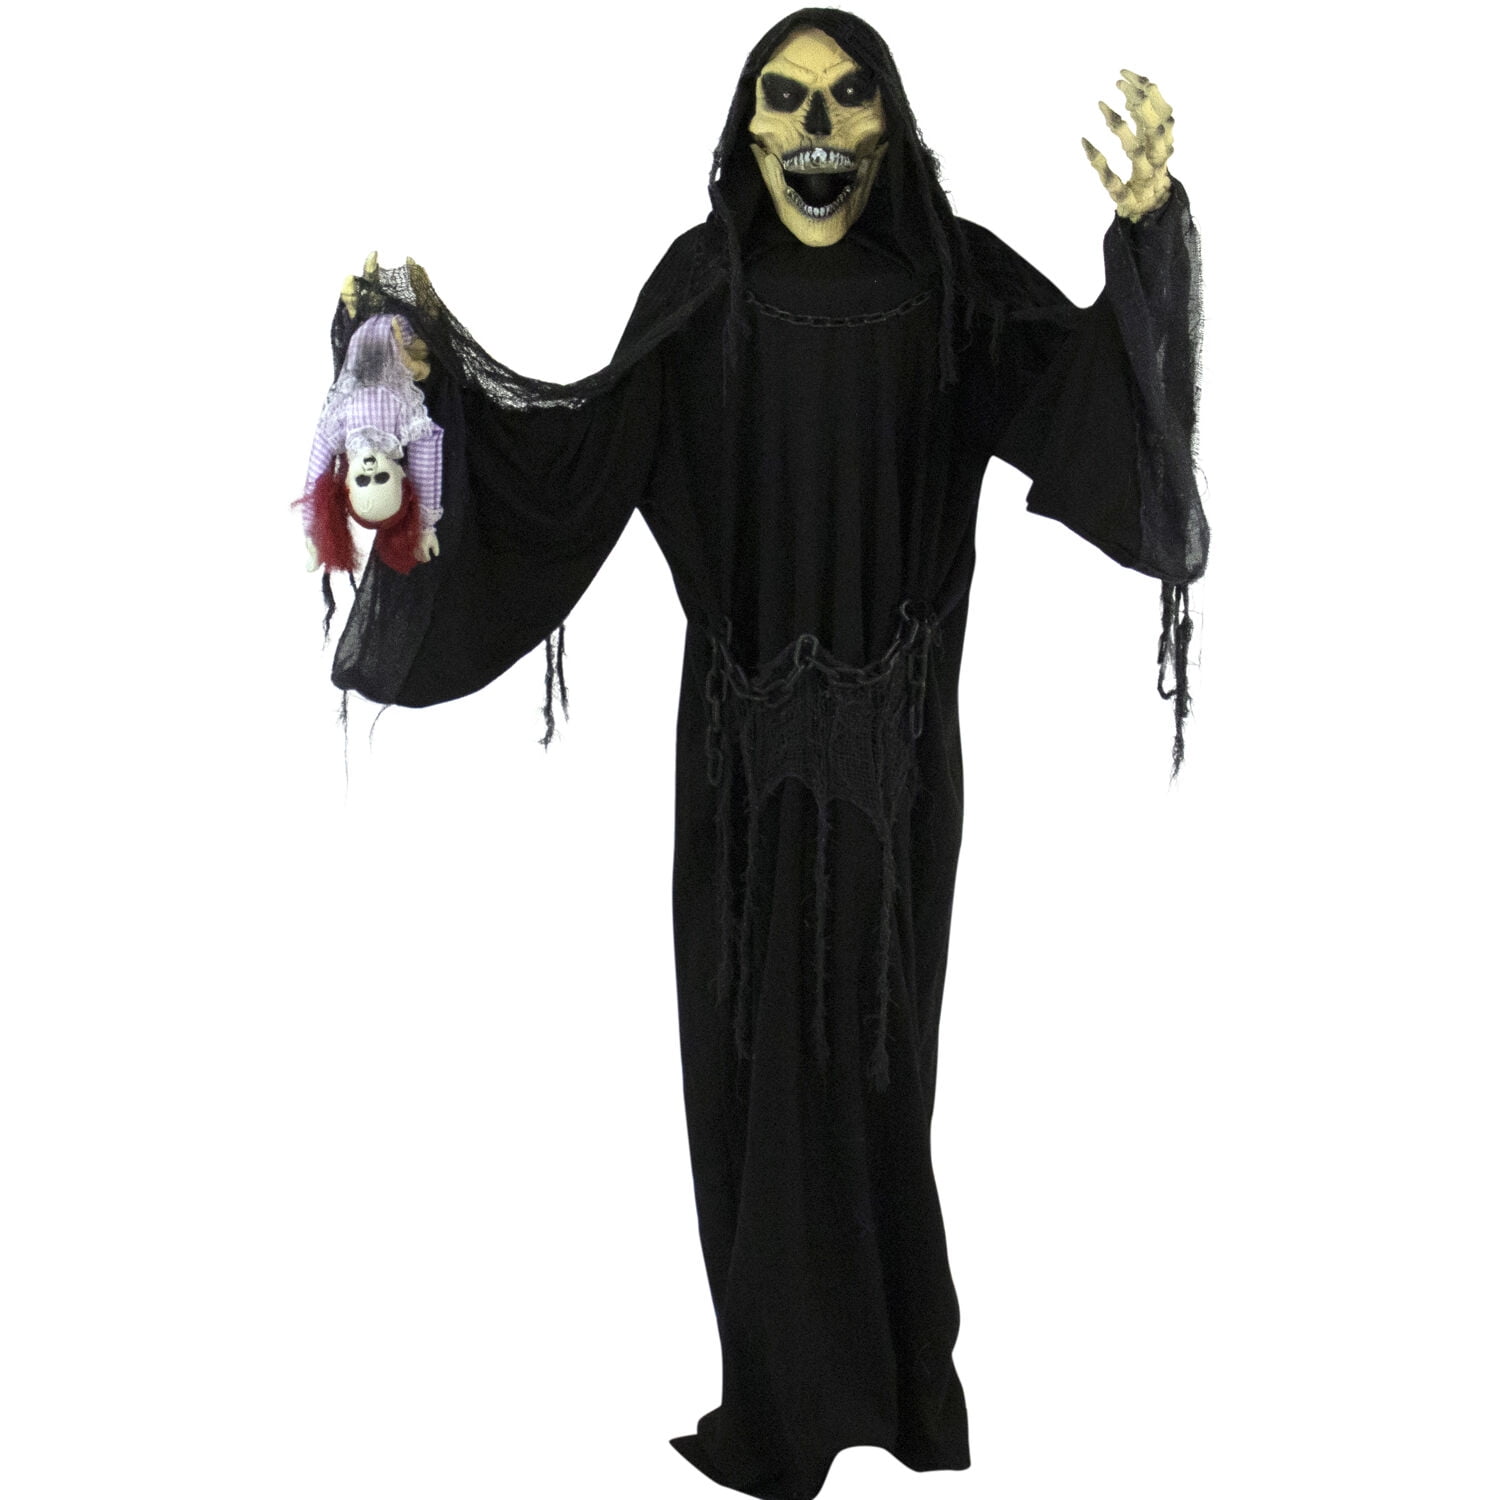 HALLOWEEN LIFE SIZE ANIMATED GRAVEYARD REAPER  PROP DECORATION HAUNTED HOUSE 